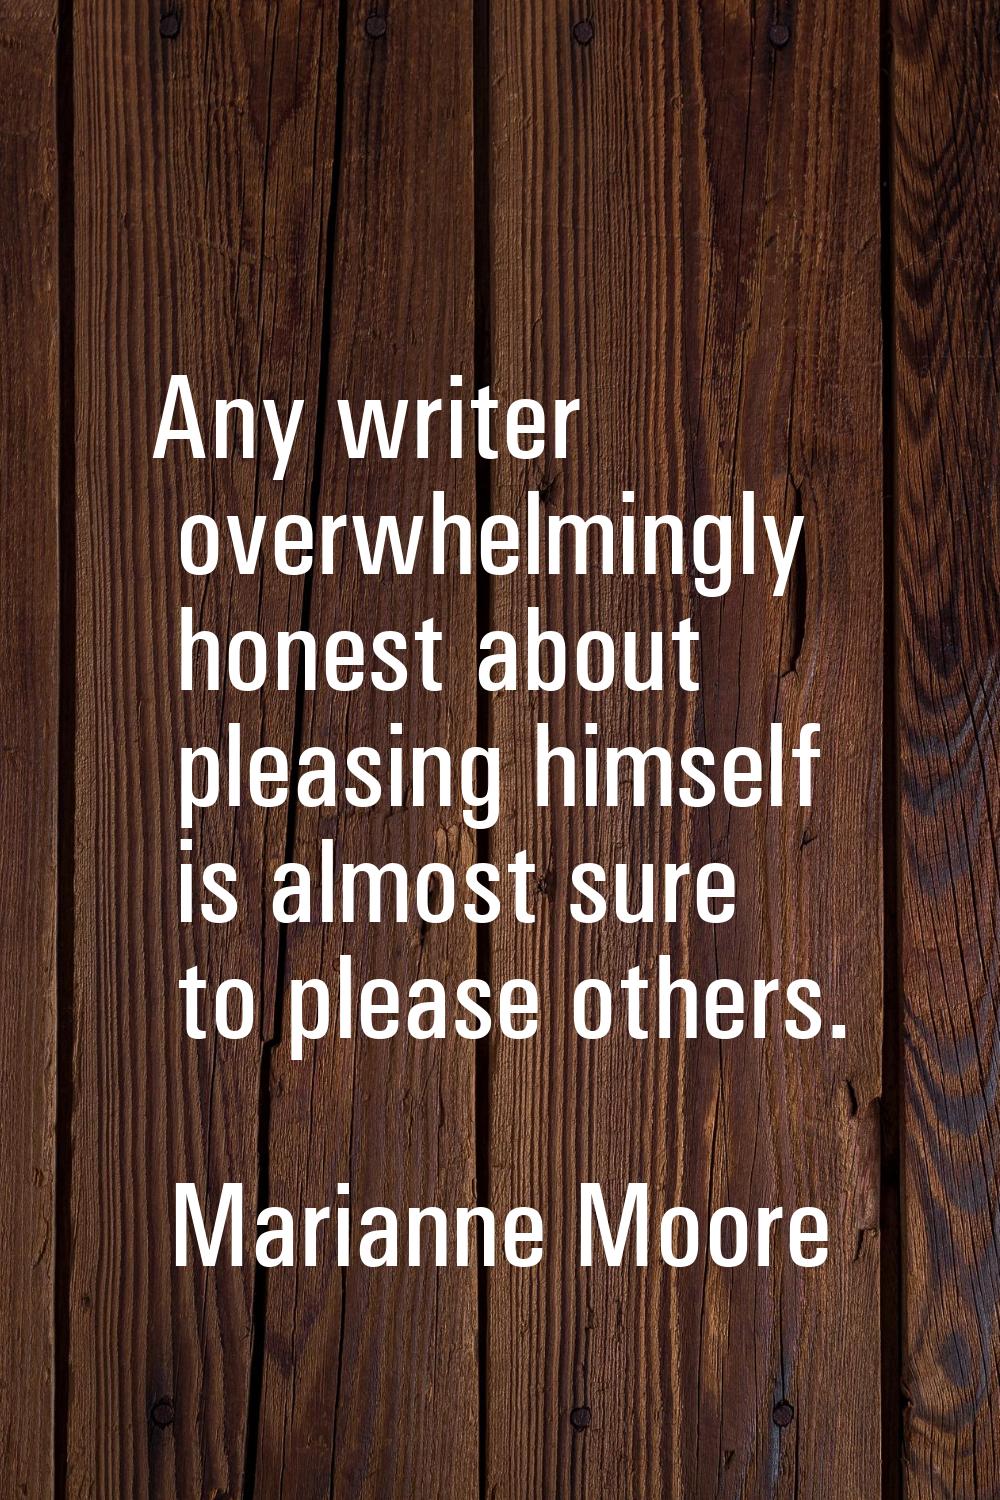 Any writer overwhelmingly honest about pleasing himself is almost sure to please others.